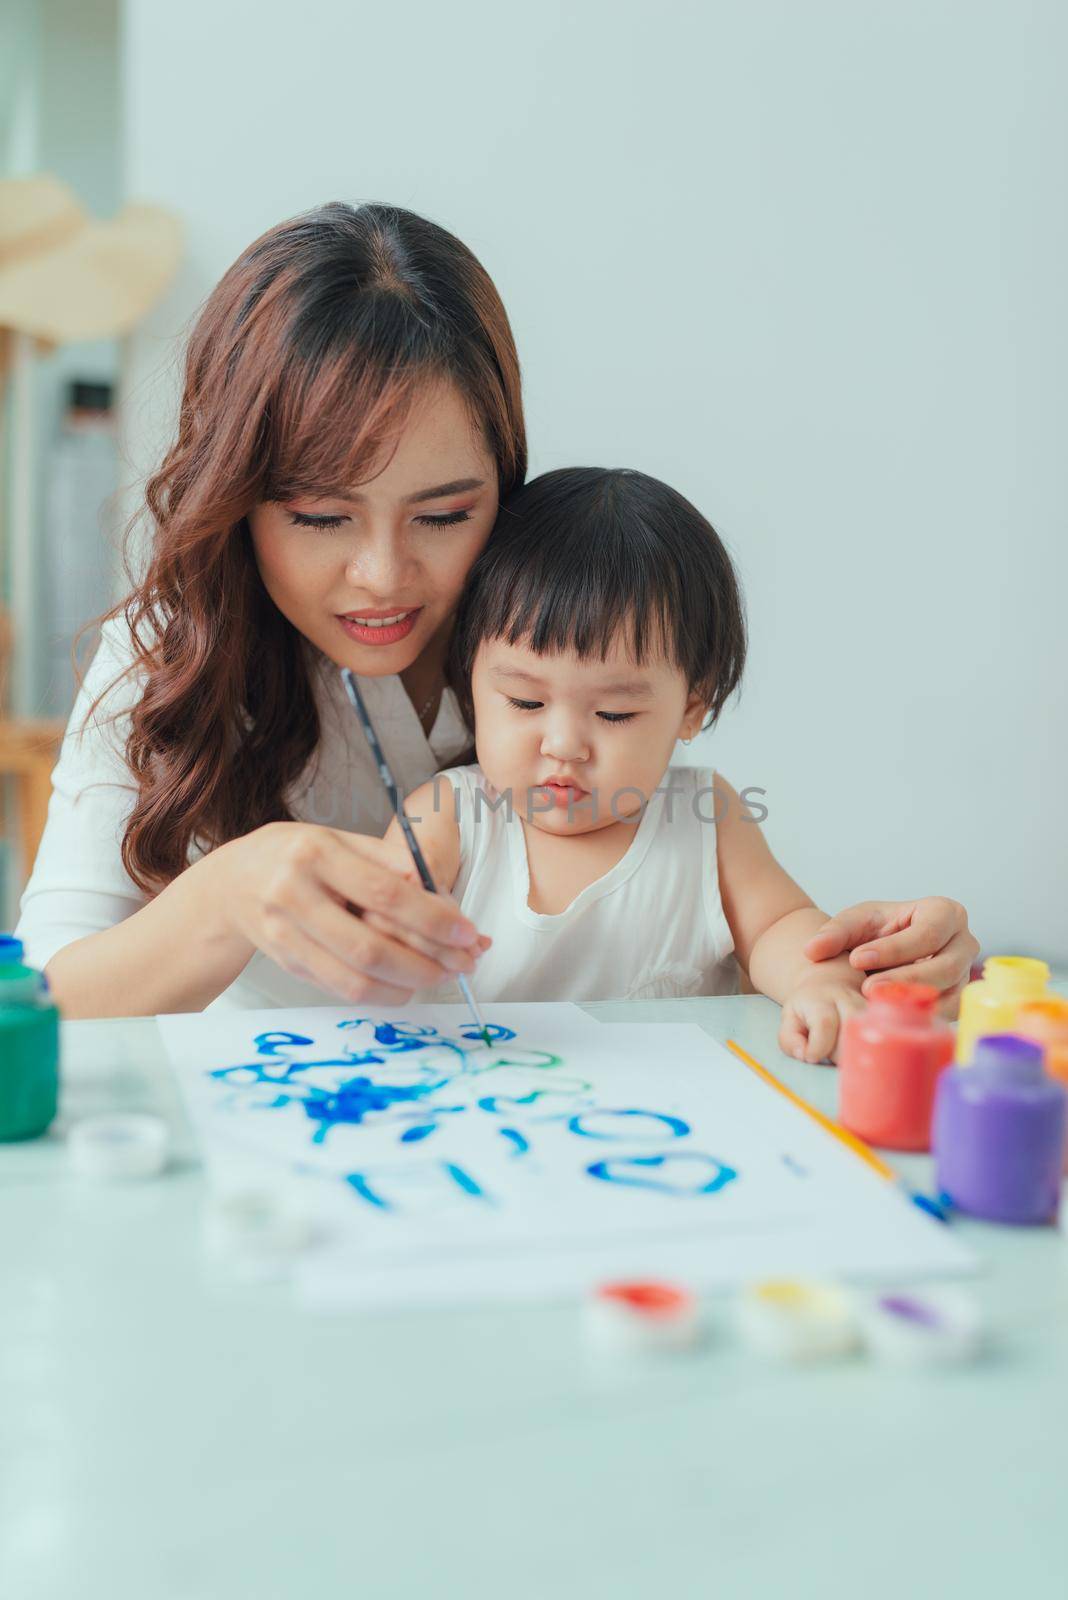 Little girl painting with her mother at home by makidotvn